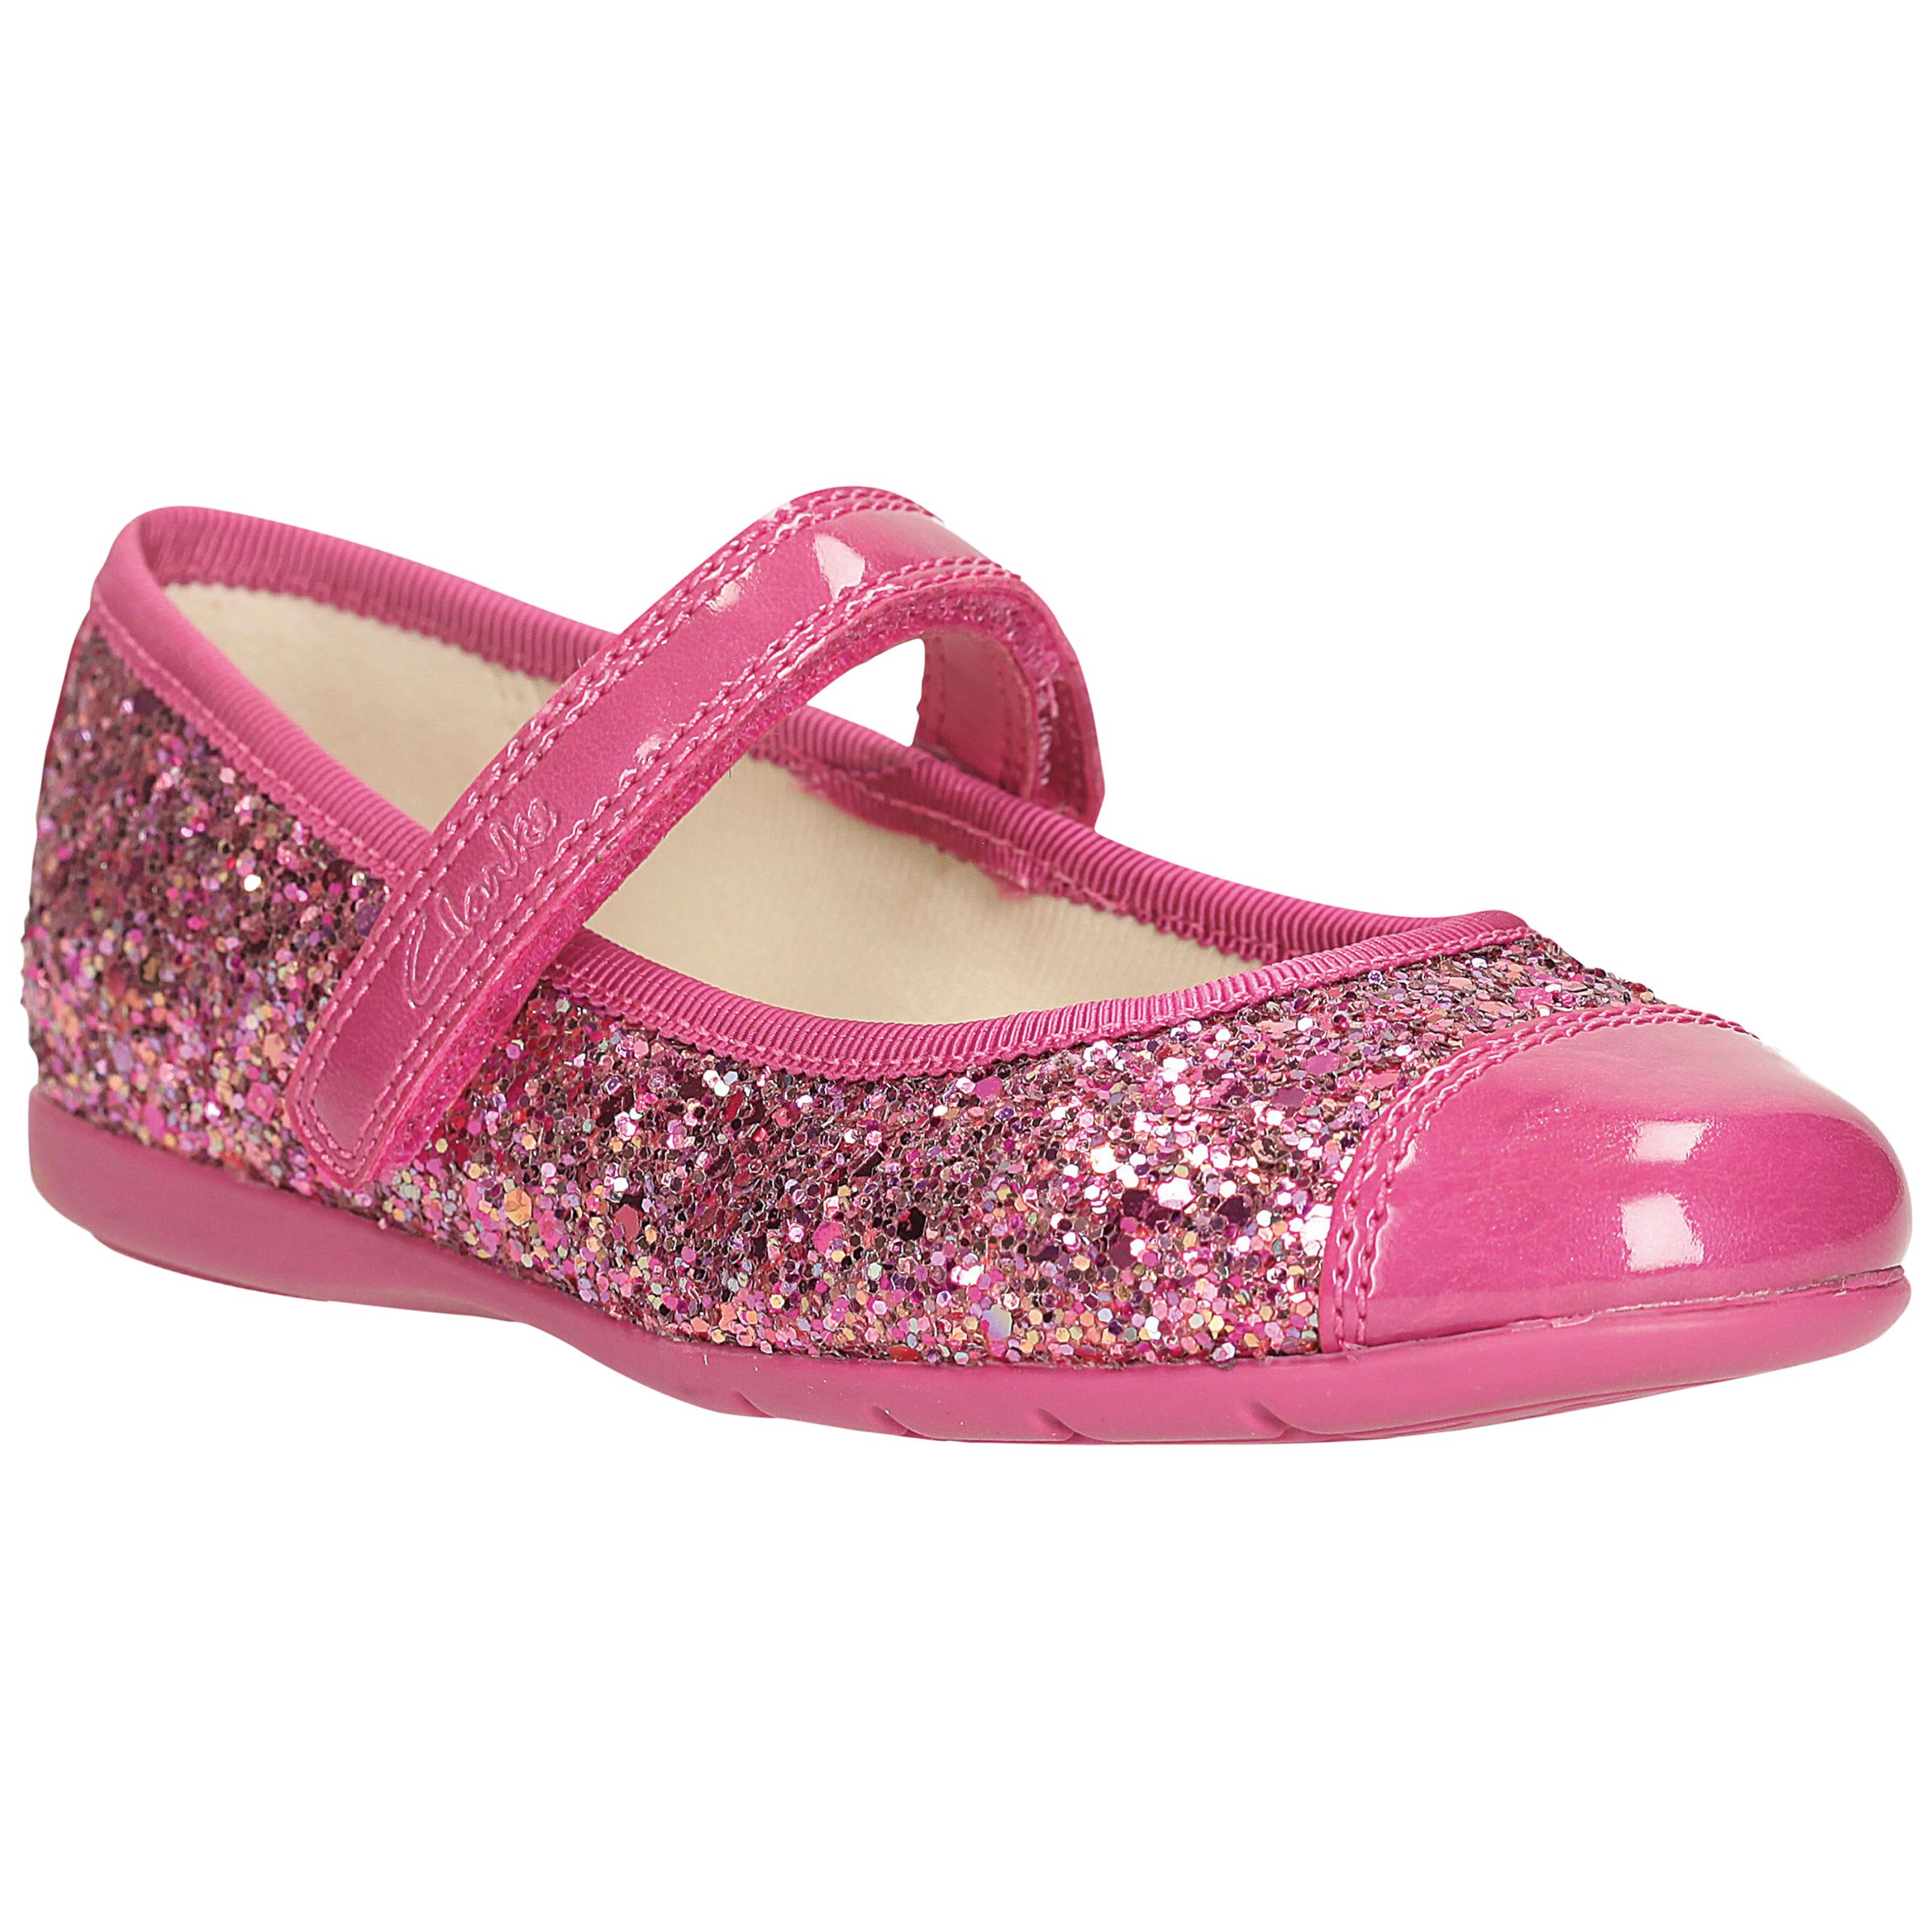 clarks pink glitter shoes